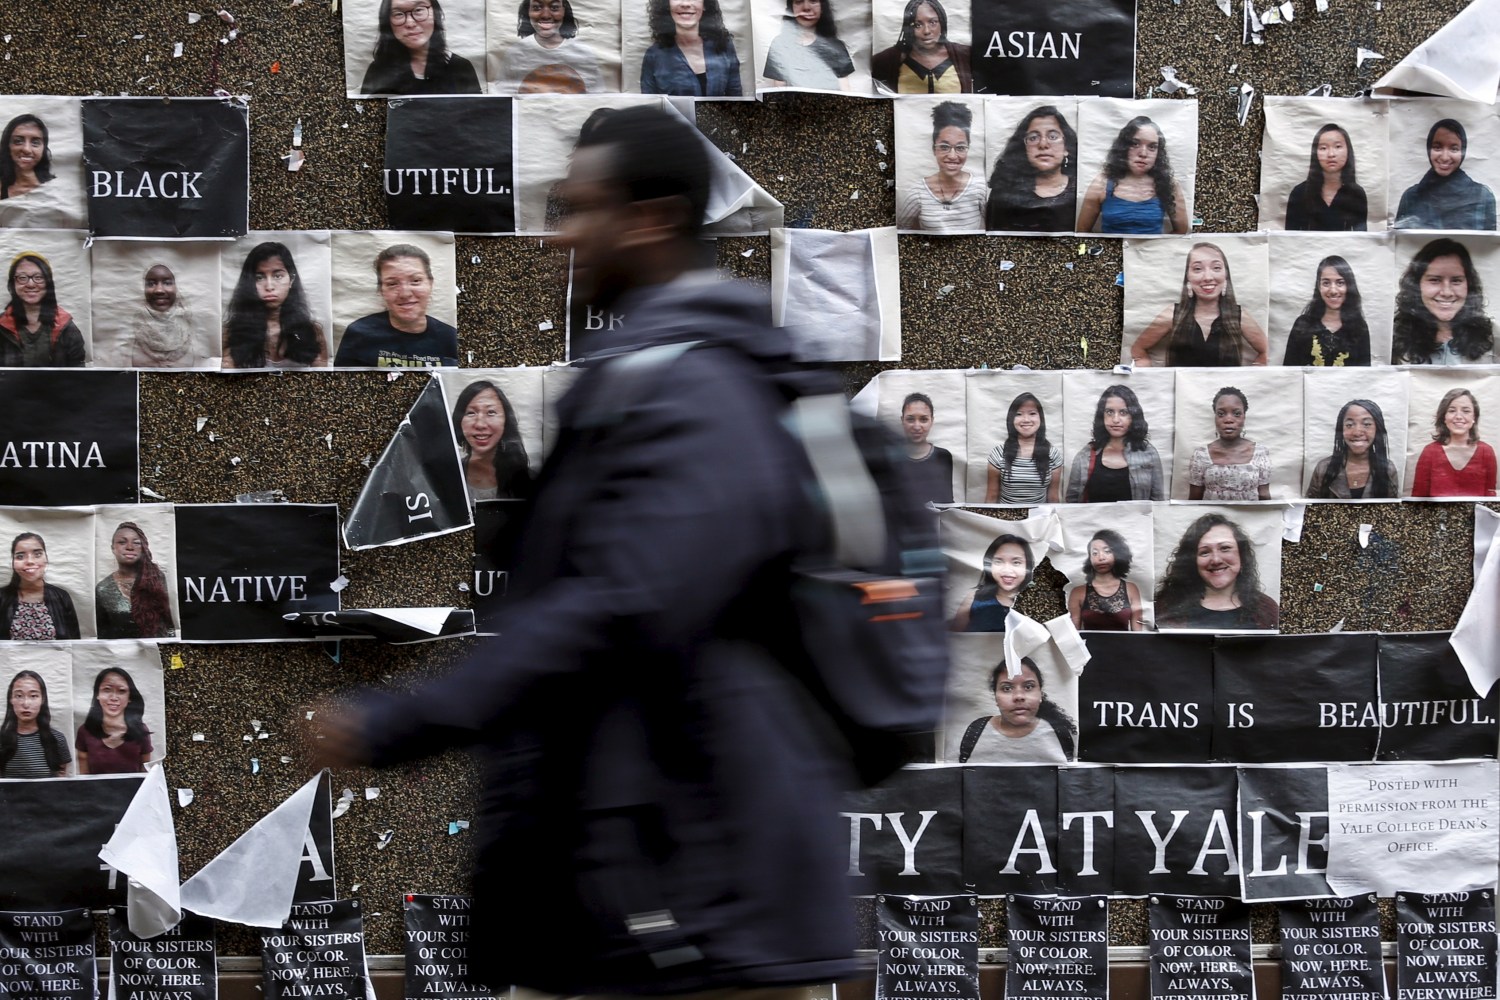 A student walks by a college notice board on campus at Yale University where more than 1,000 students, professors and staff at gathered to discuss race and diversity.